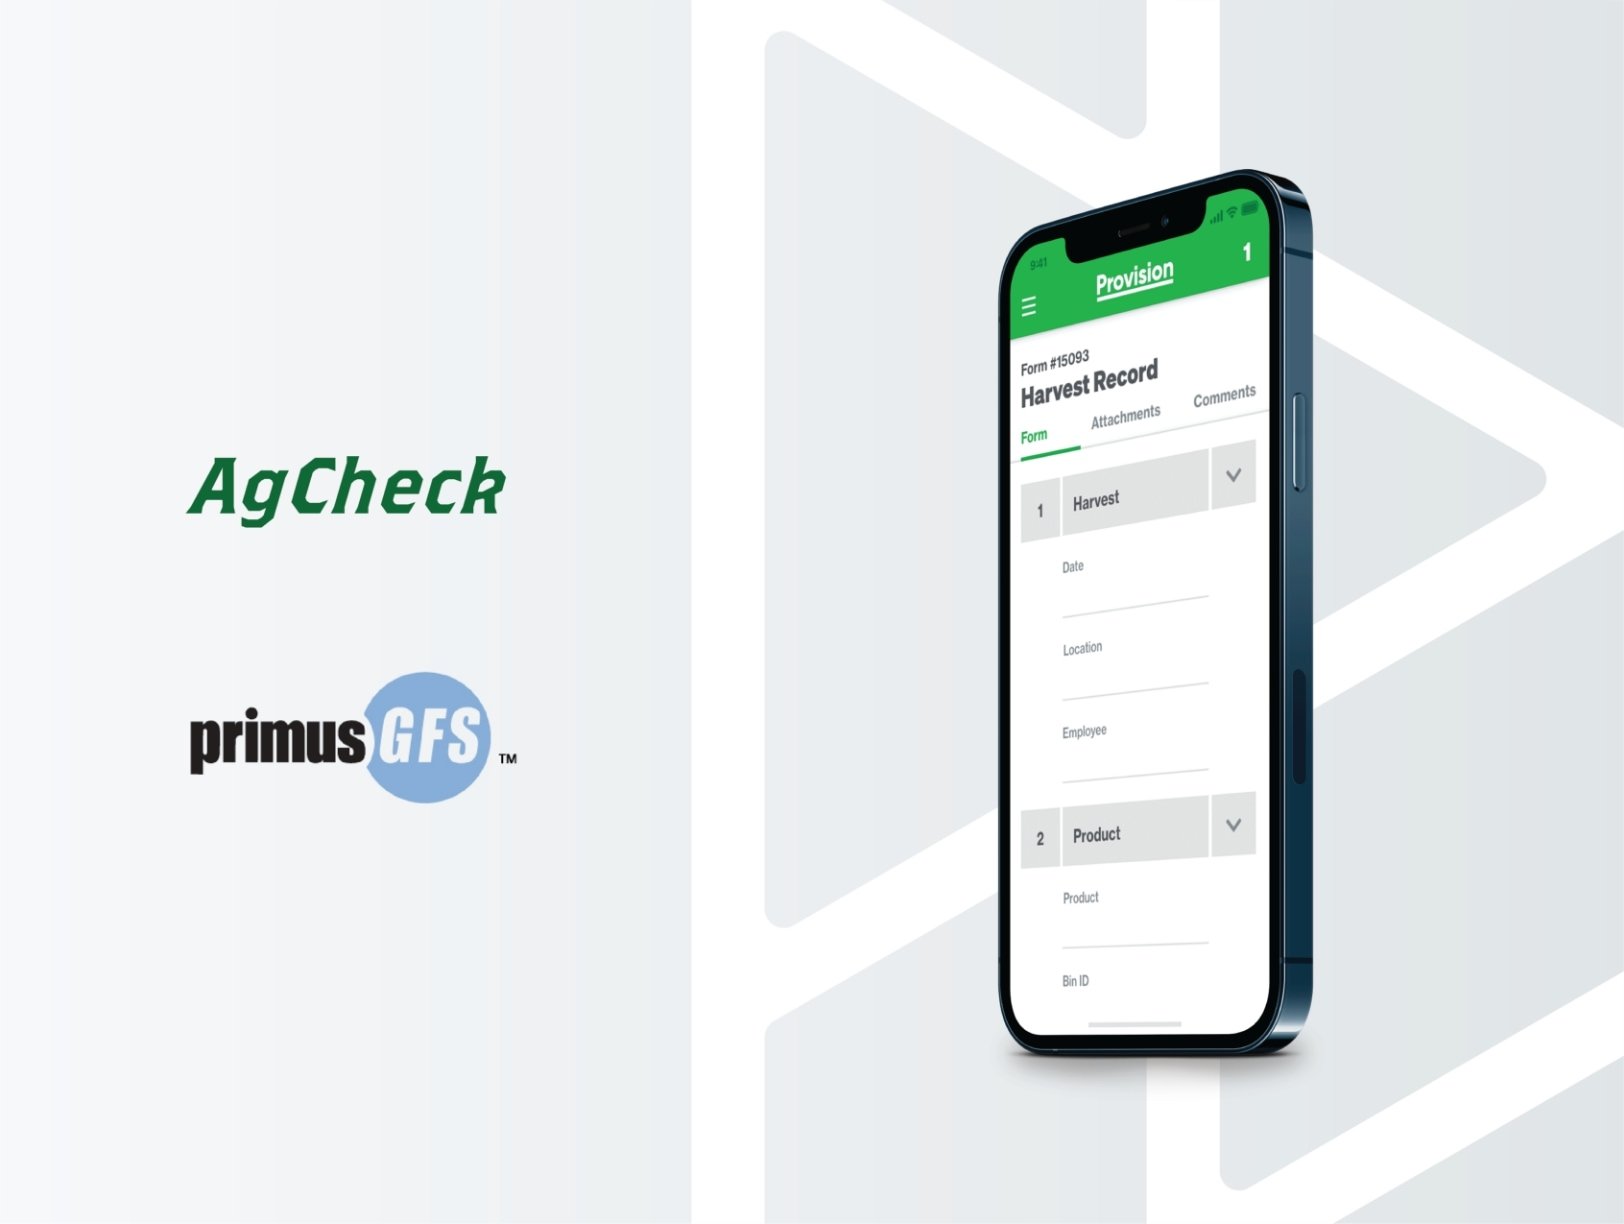 agcheck and primusgfs logos beside harvest record form on mobile